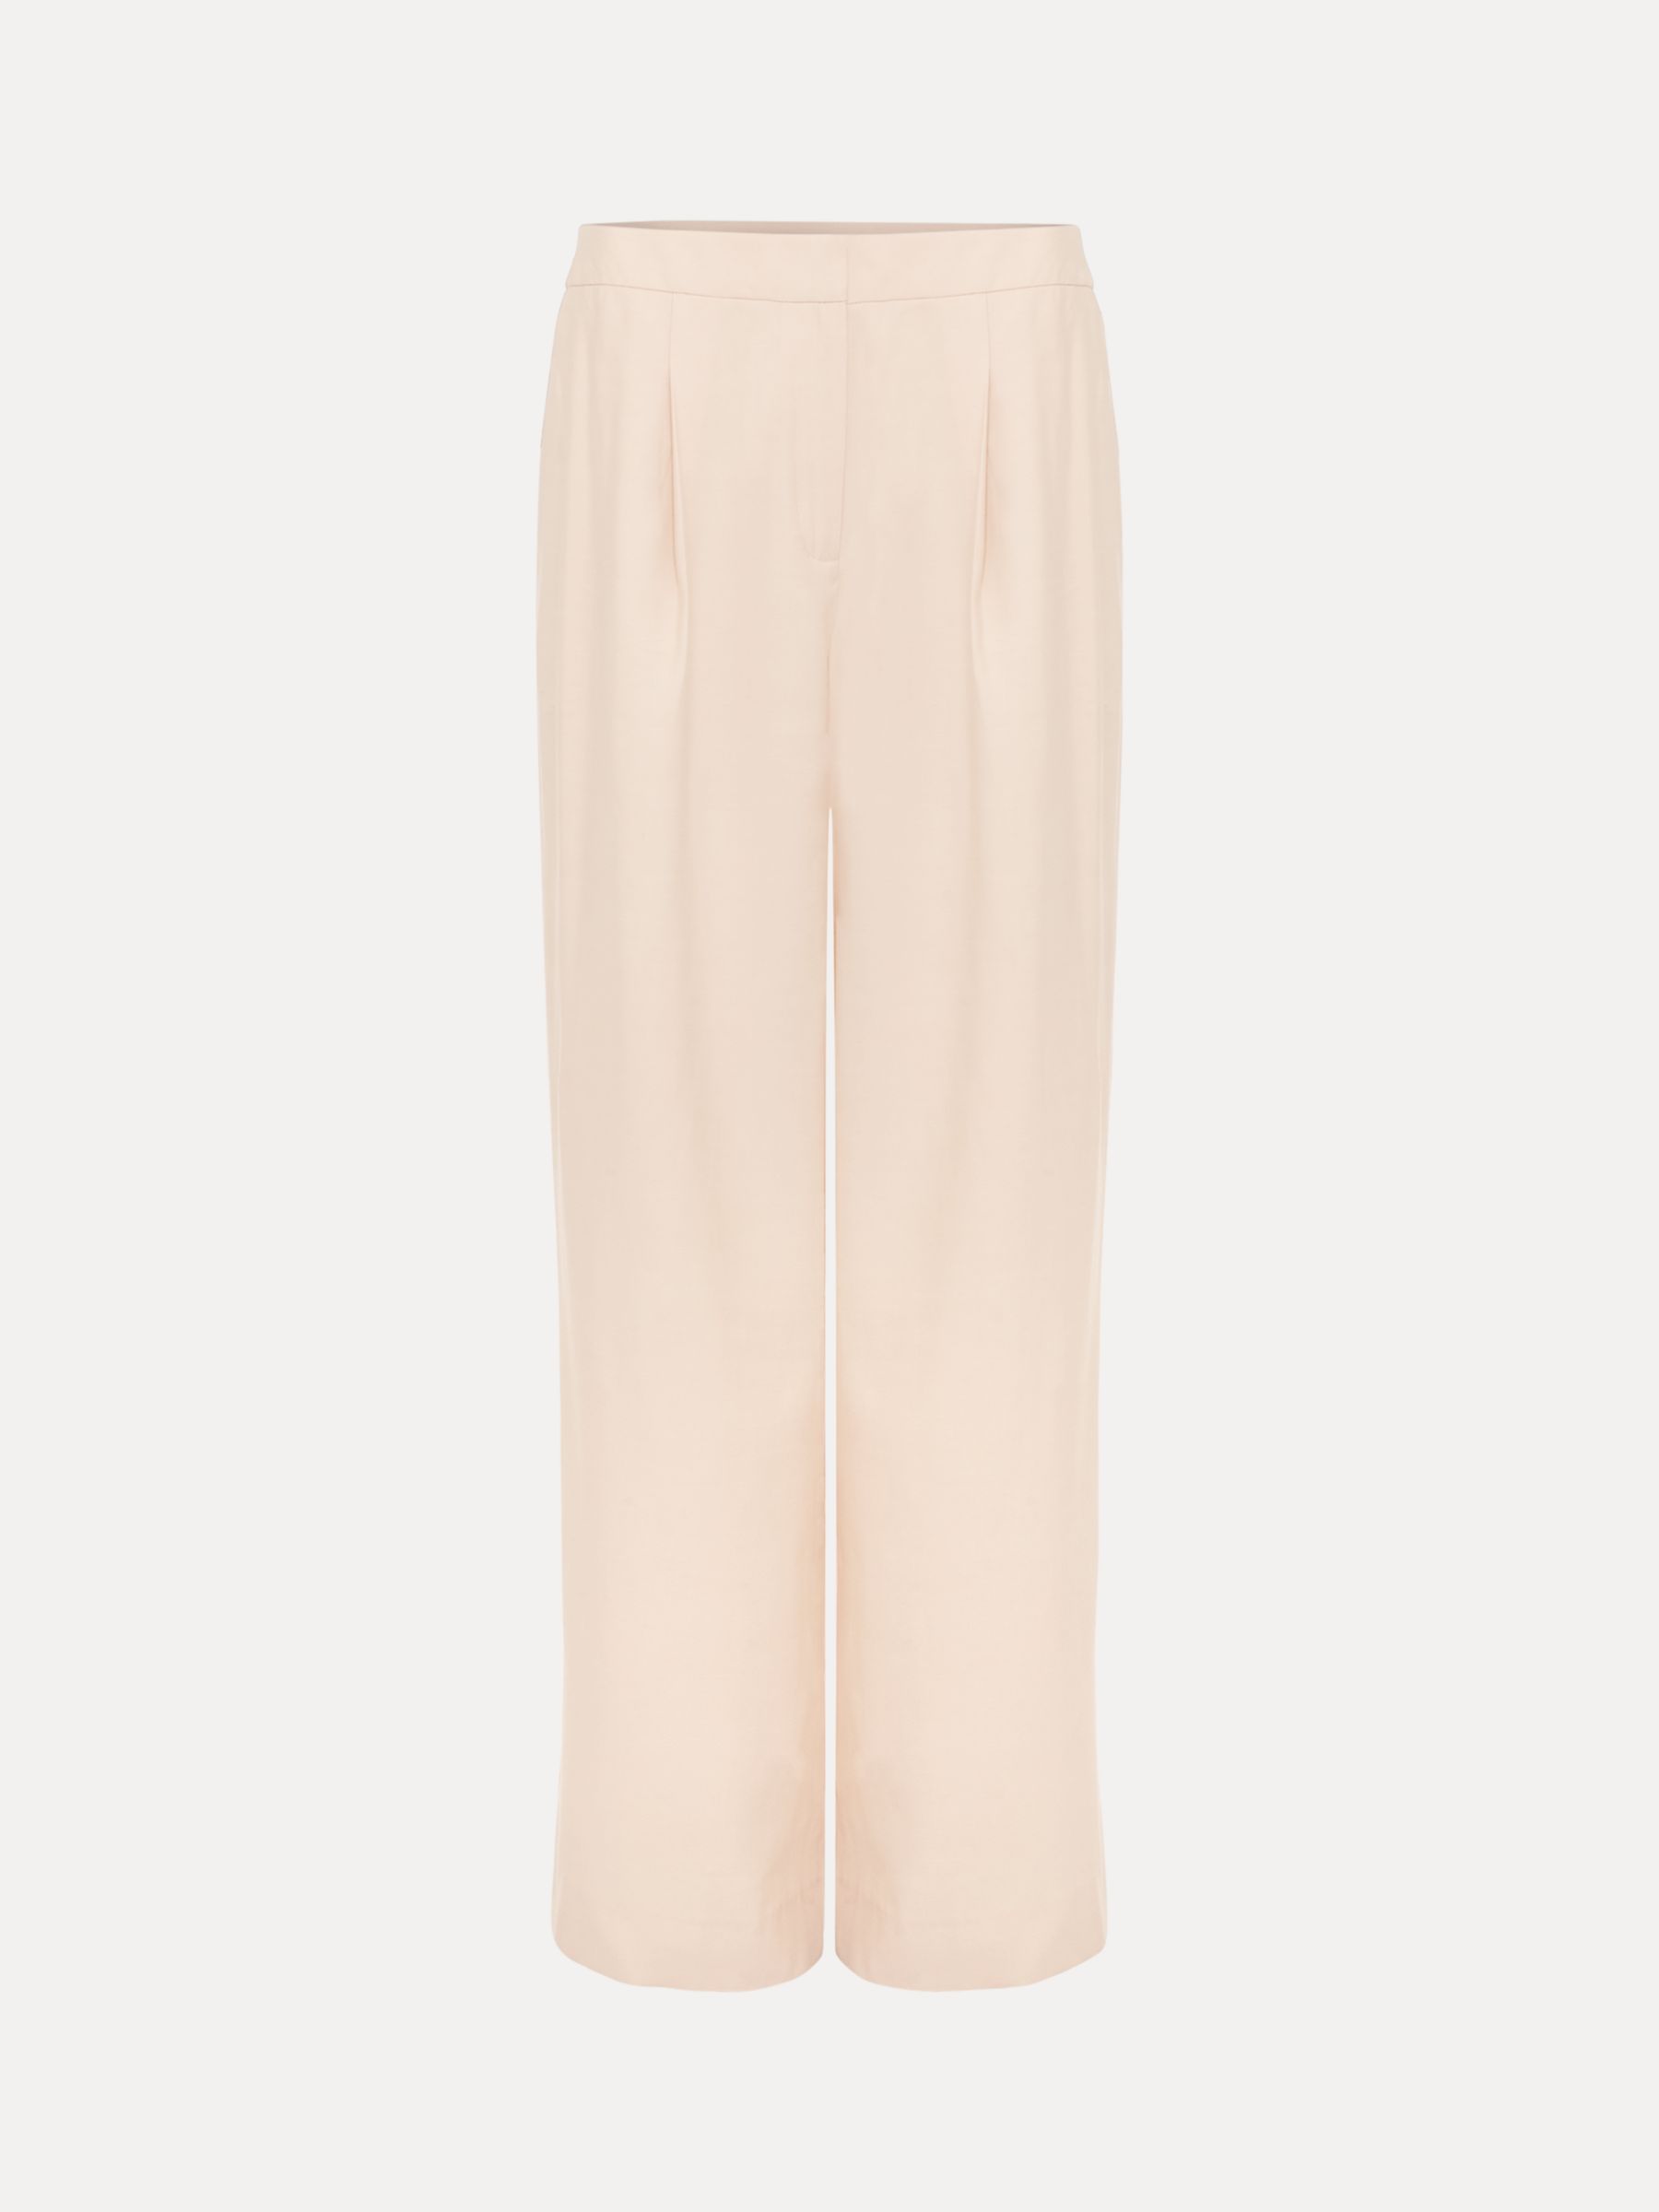 Phase Eight Bianca Wide Leg Trousers, Coral, 16